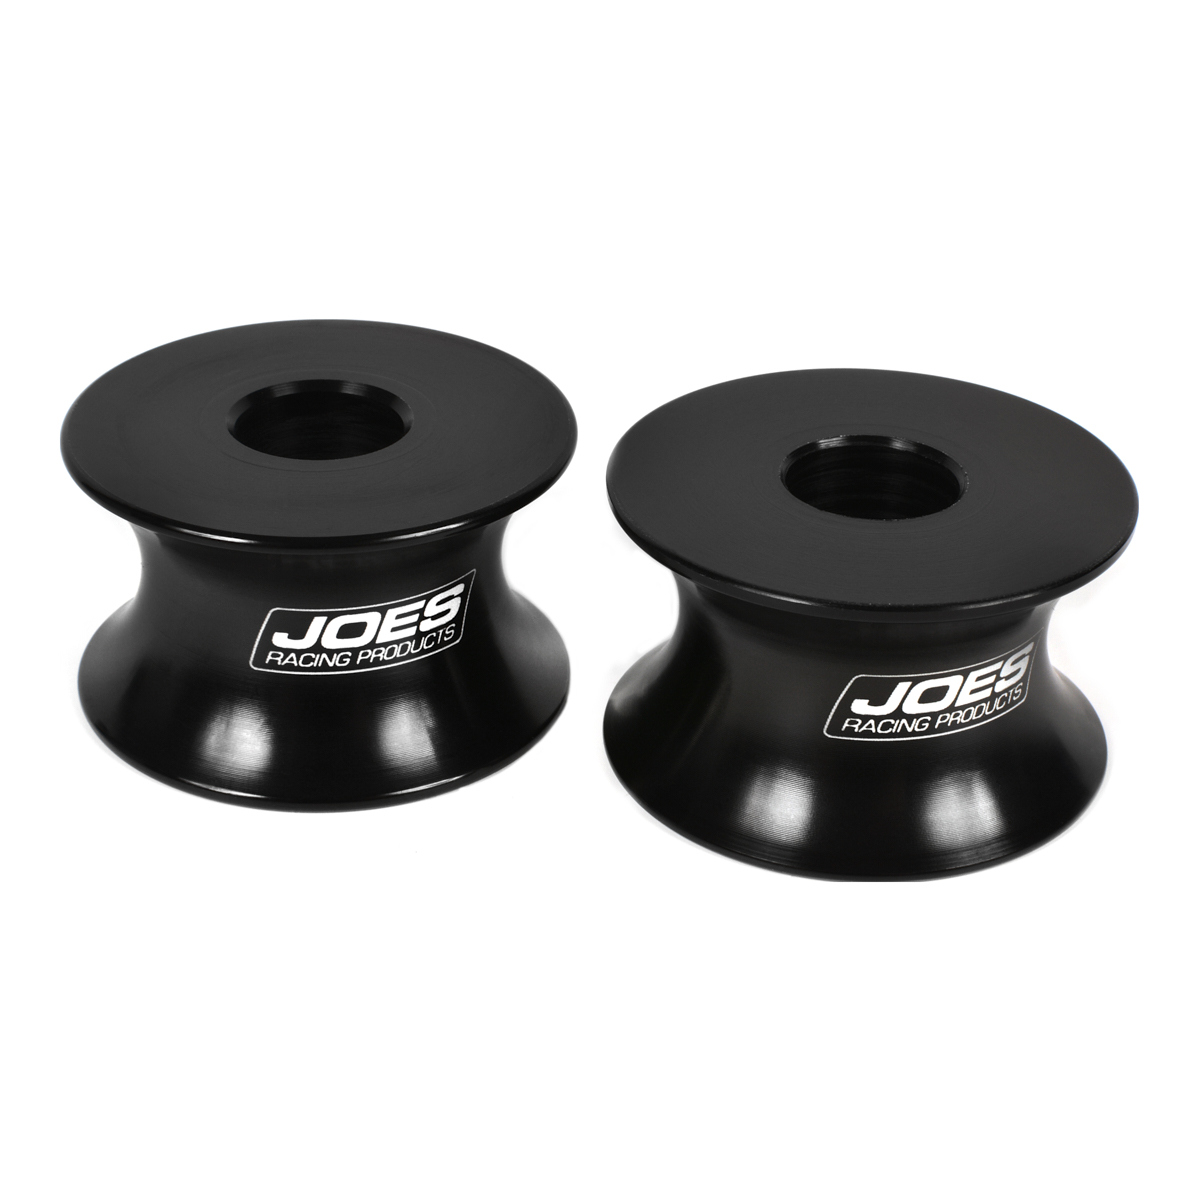 Joes Racing Products 10968-B Motor Mount Spacer, 1 in Thick, 1/2 in ID, Aluminum, Black Anodized, Pair